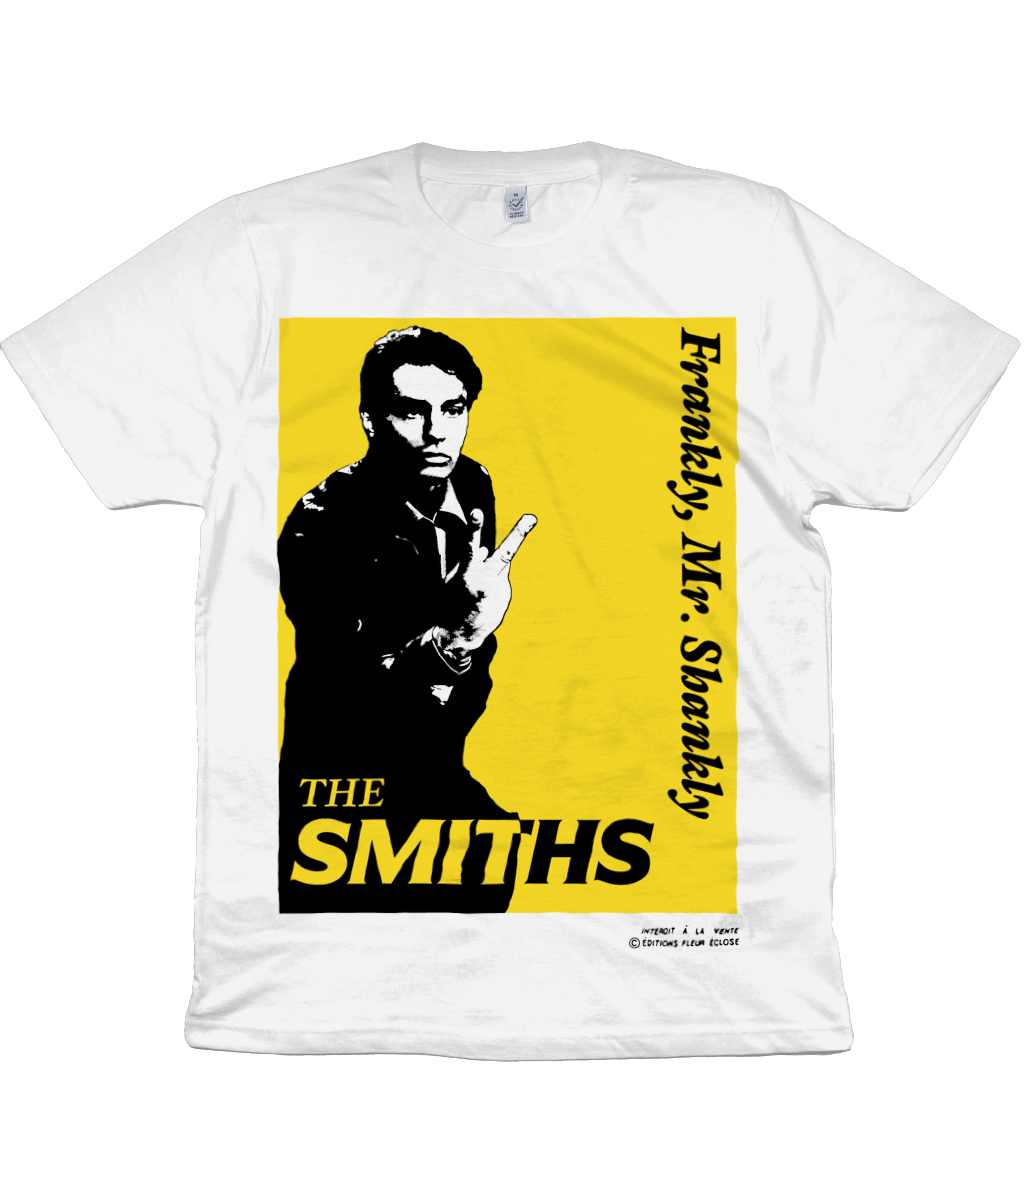 THE SMITHS - Frankly, Mr. Shankly - Promo 1989 - Featuring Alain Delon ...